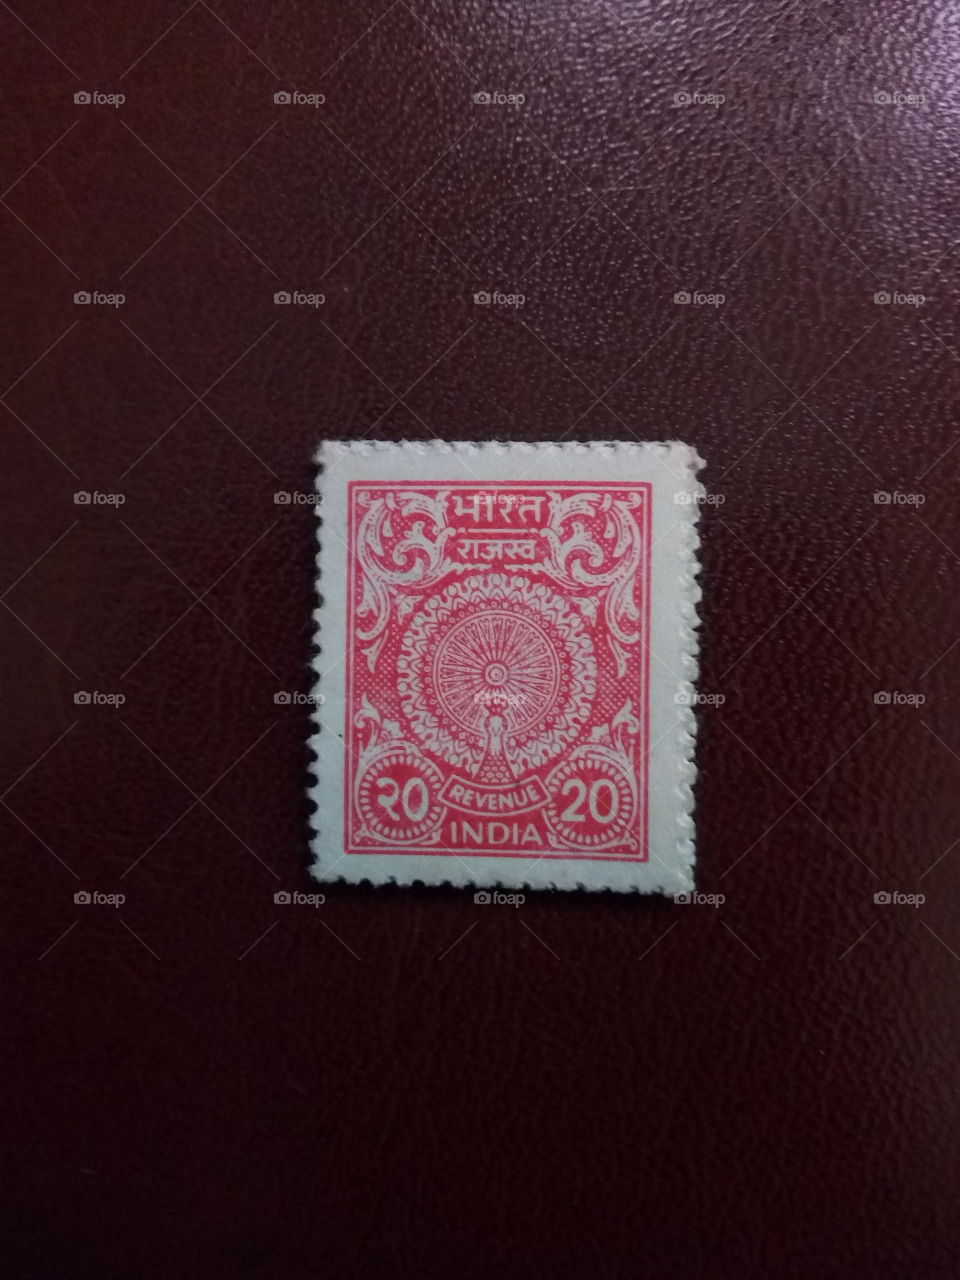 old unique Indian Revenue Ticket worth price of 20 pesa means 1/5 of one Rupee.